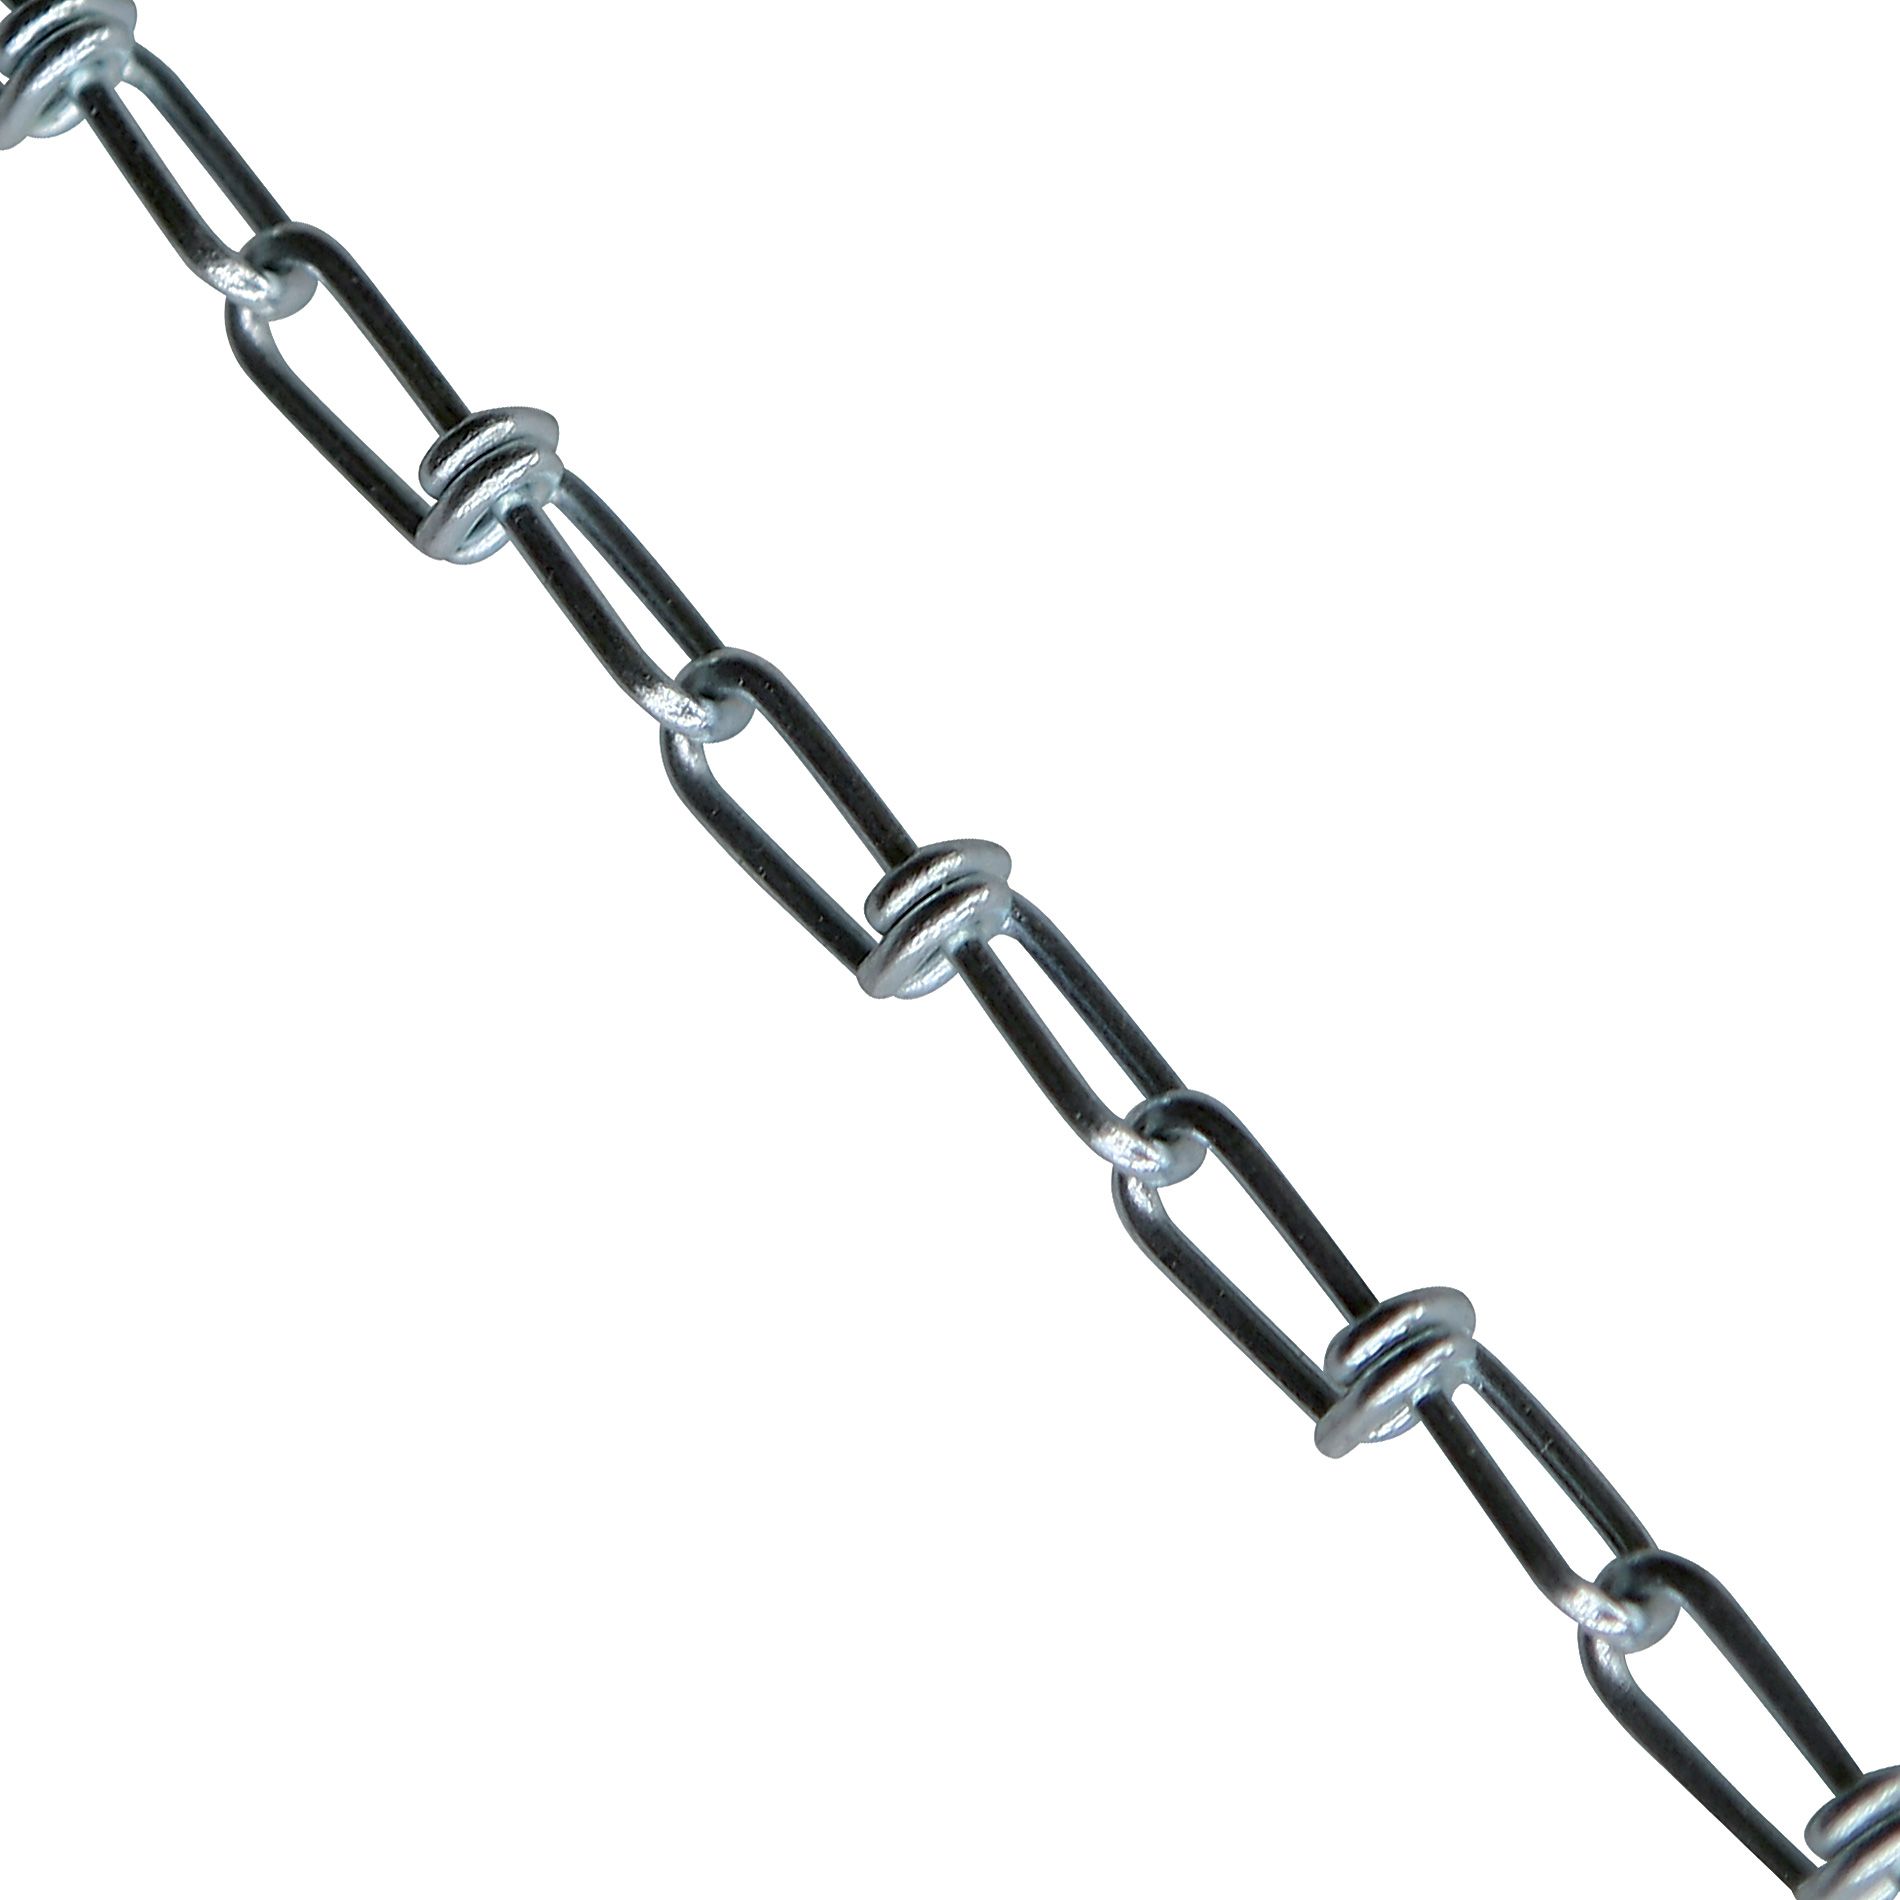 ASC MC13031715 Low Carbon Steel Inco Double Loop Chain 0.08 Diameter x 150 Length 90 lbs Working Load Limit Polycoated White 3 Trade 